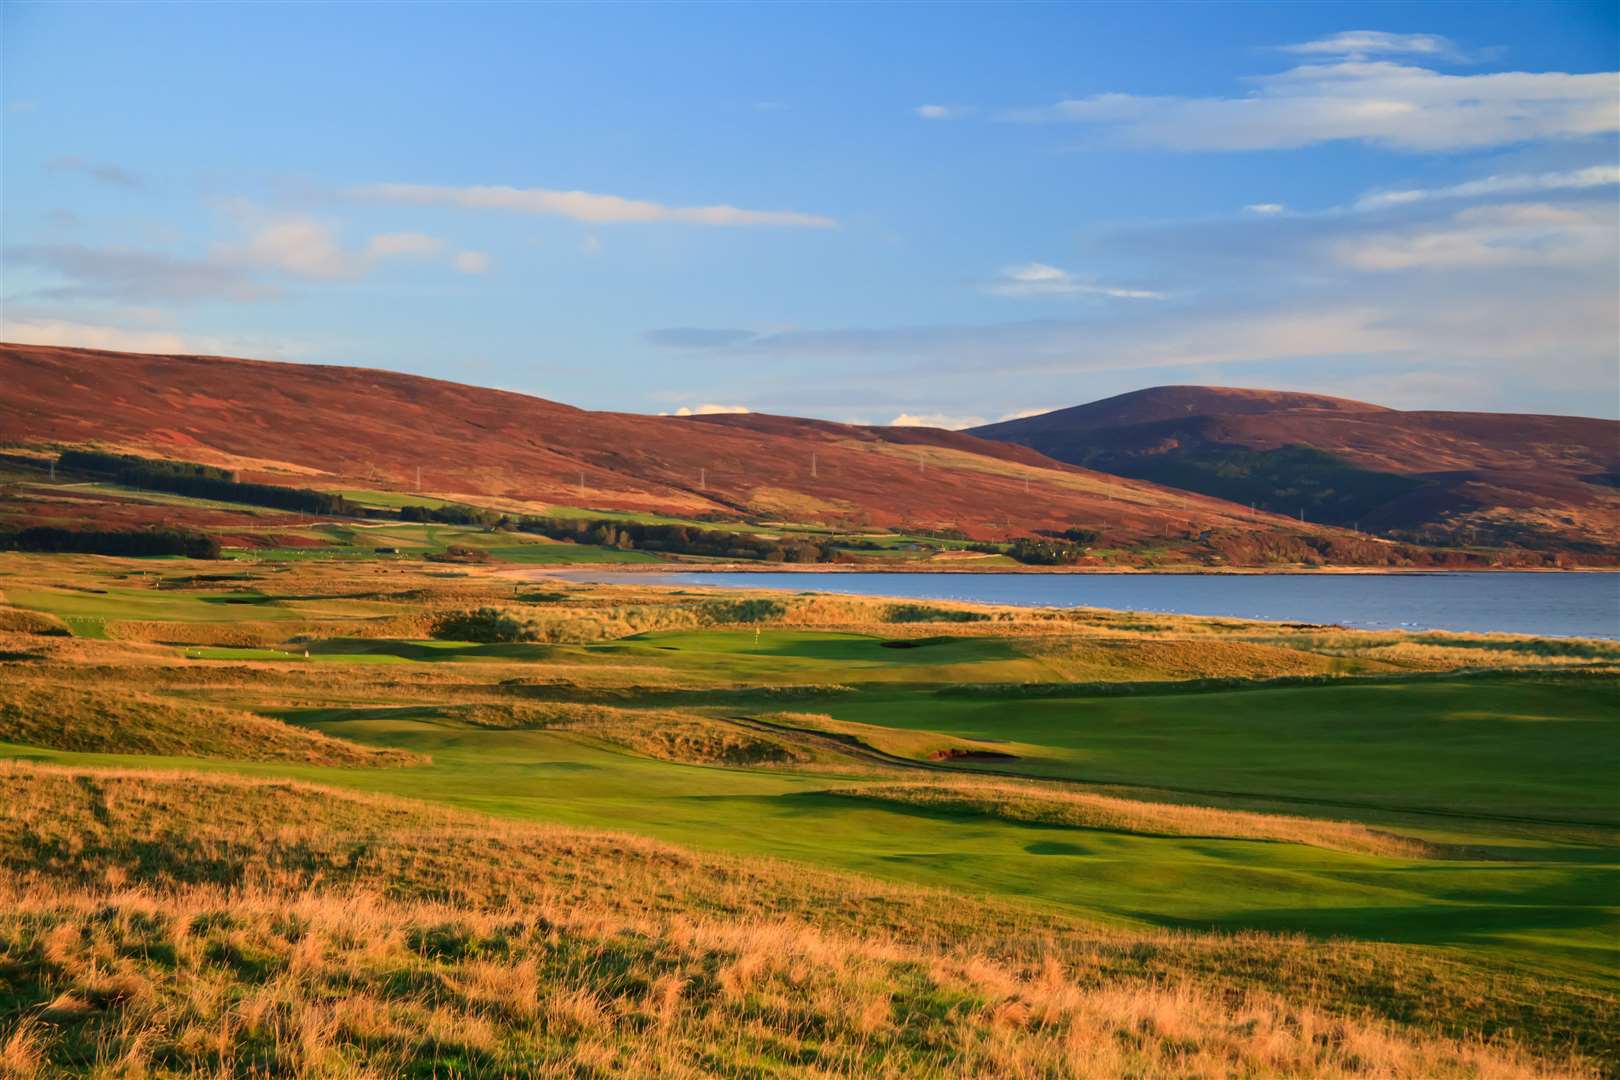 The 17th fairway and 2nd green at Brora Golf Club.